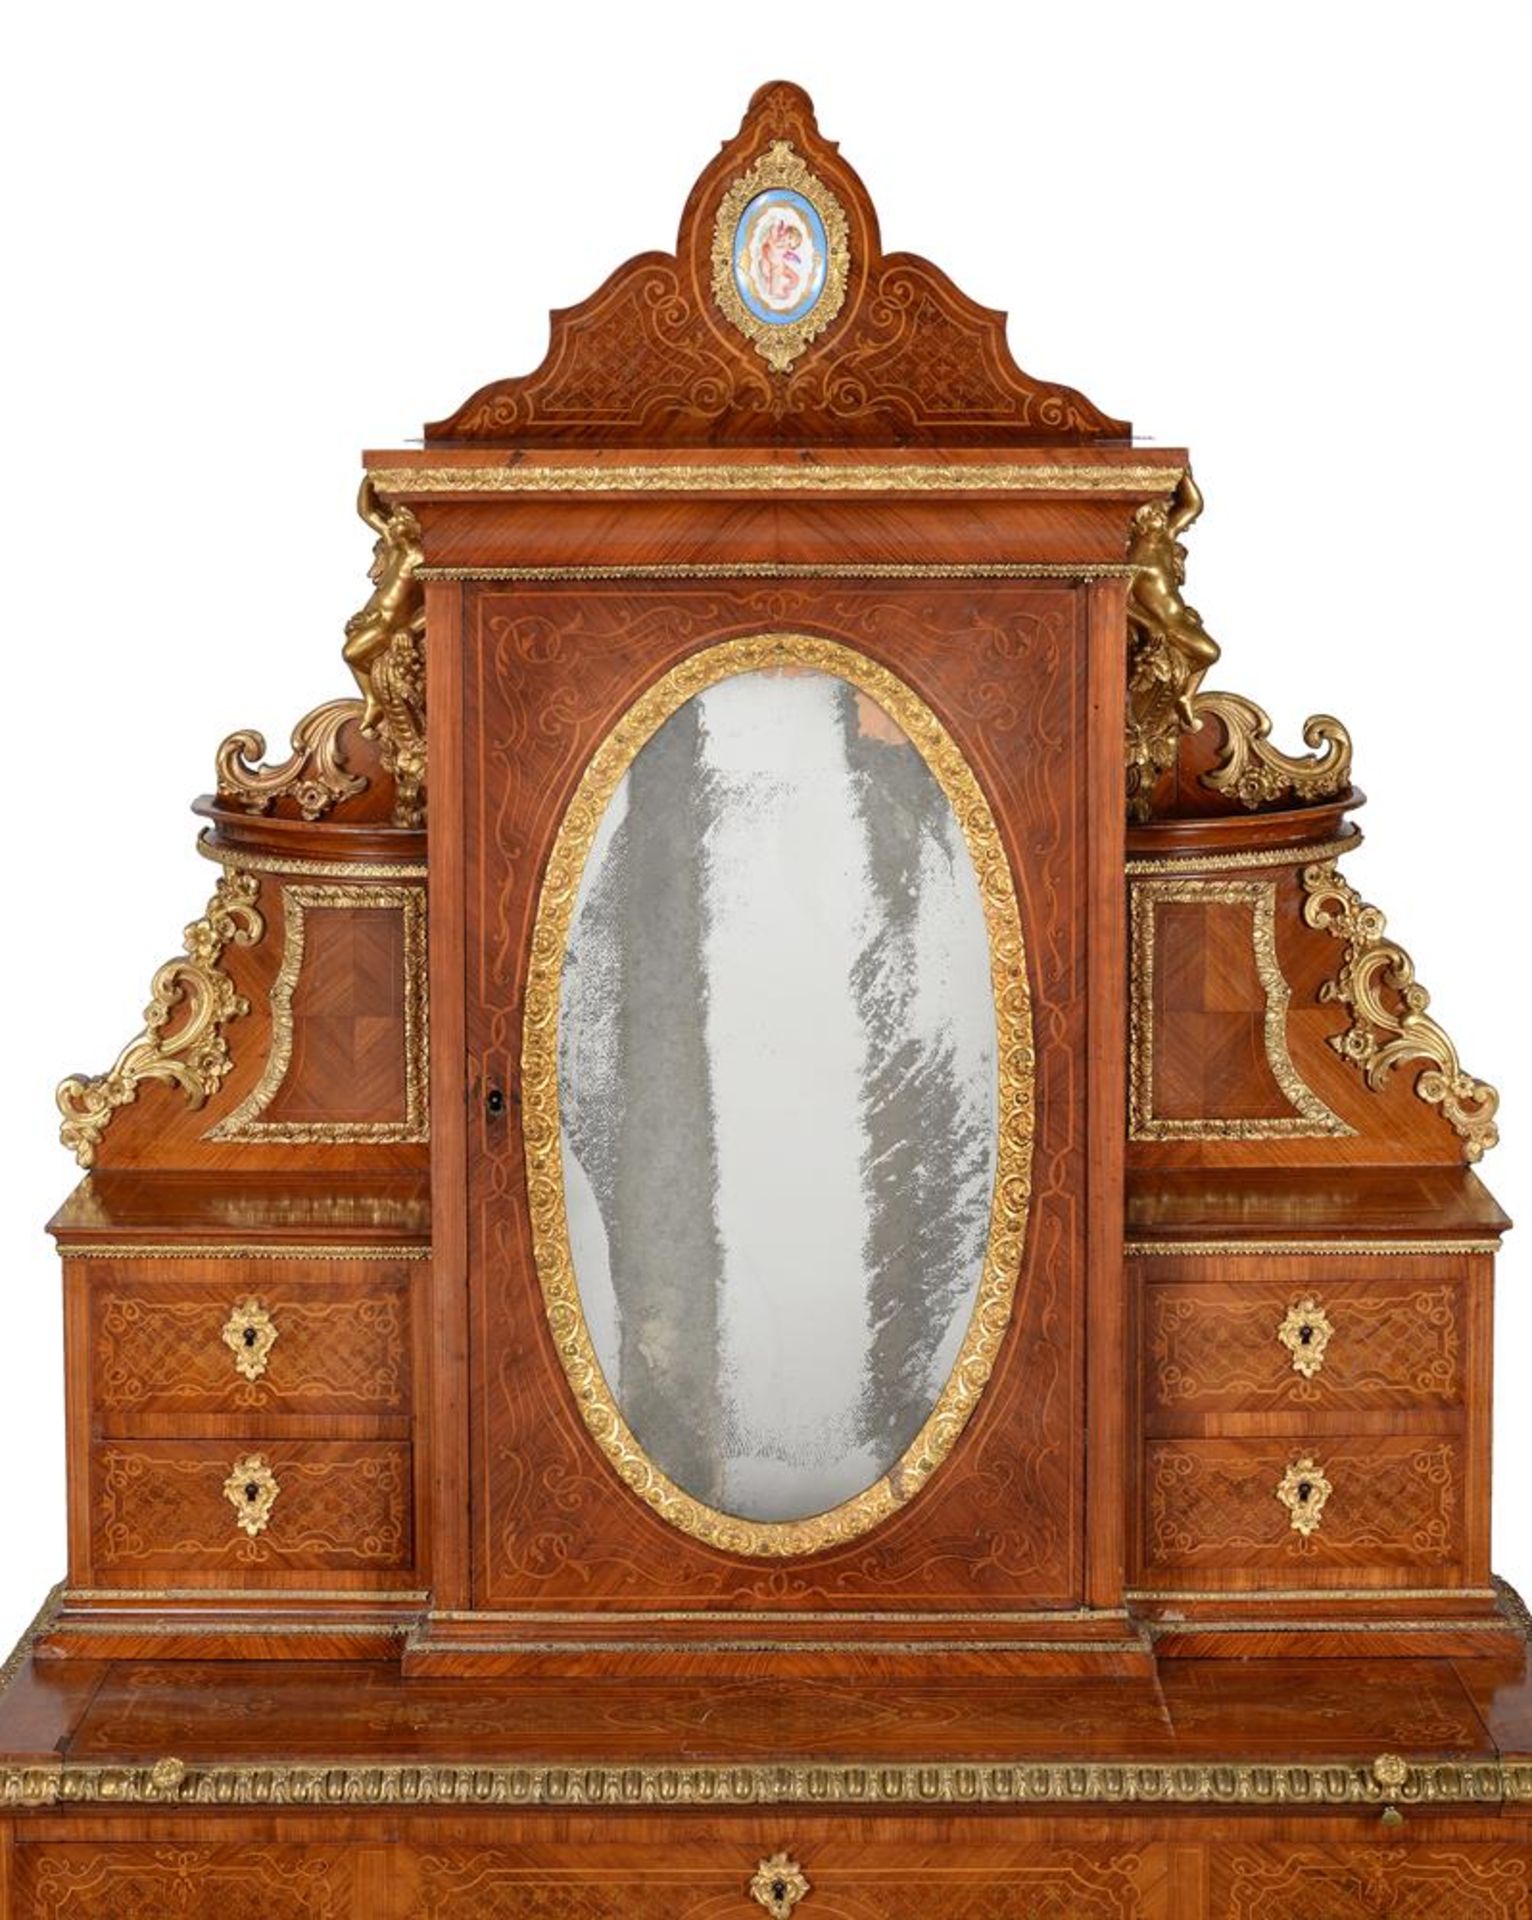 Y A VICTORIAN TULIPWOOD, WALNUT, MARQUETRY, GILT METAL AND PORCELAIN MOUNTED CABINET, CIRCA 1875 - Image 2 of 7